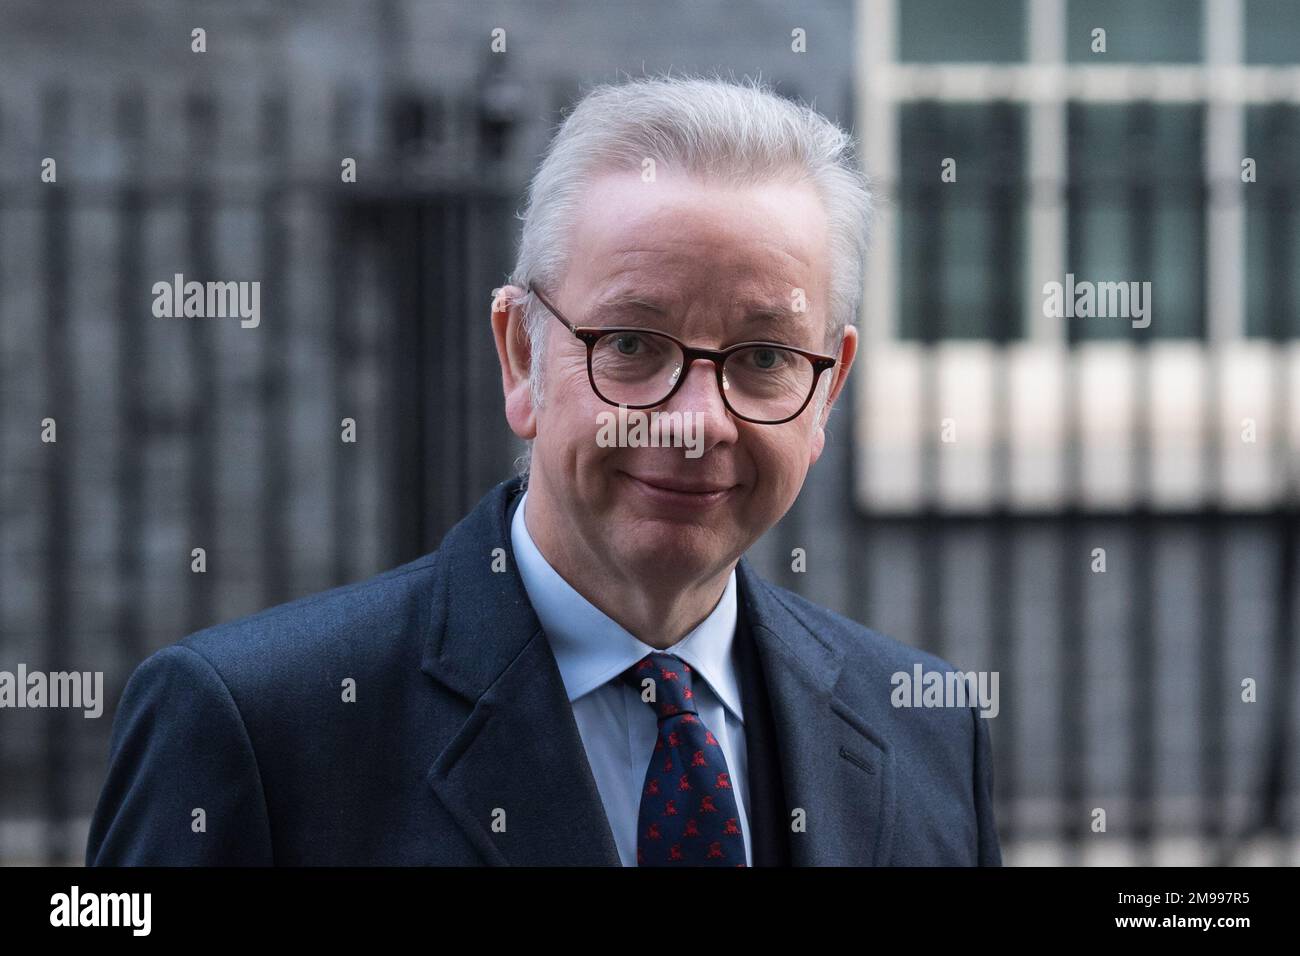 London, UK. 17th January, 2023. Secretary of State for Levelling Up, Housing and Communities, Minister for Intergovernmental Relations Michael Gove leaves 10 Downing Street after attending the weekly Cabinet meeting chaired by Prime Minister Rishi Sunak. Credit: Wiktor Szymanowicz/Alamy Live News Stock Photo